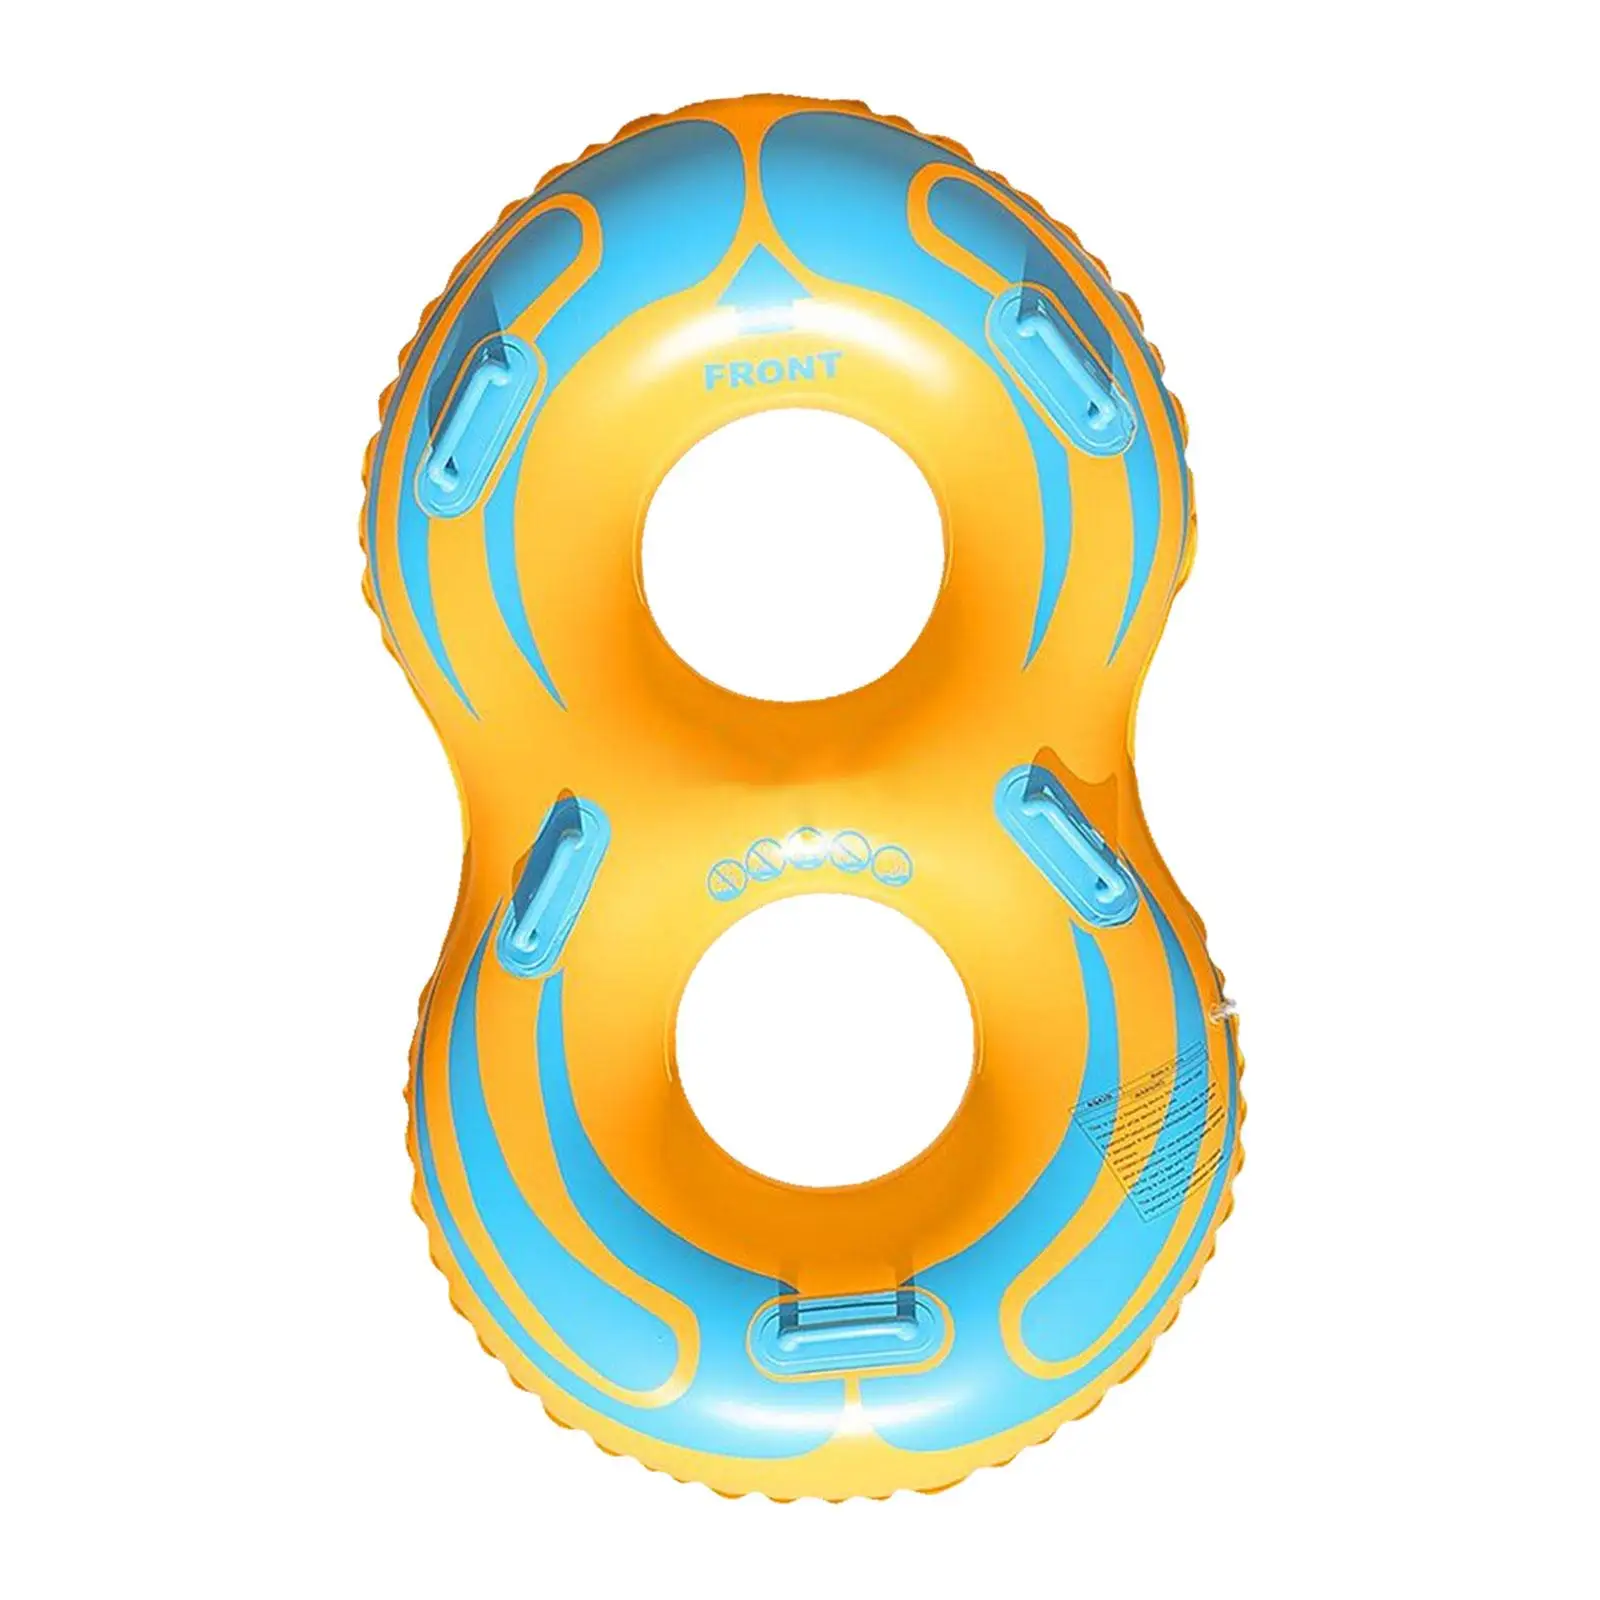 Swim Tubes Rings Portable Inflatable Pool Floats for Water Park Rivers Beach